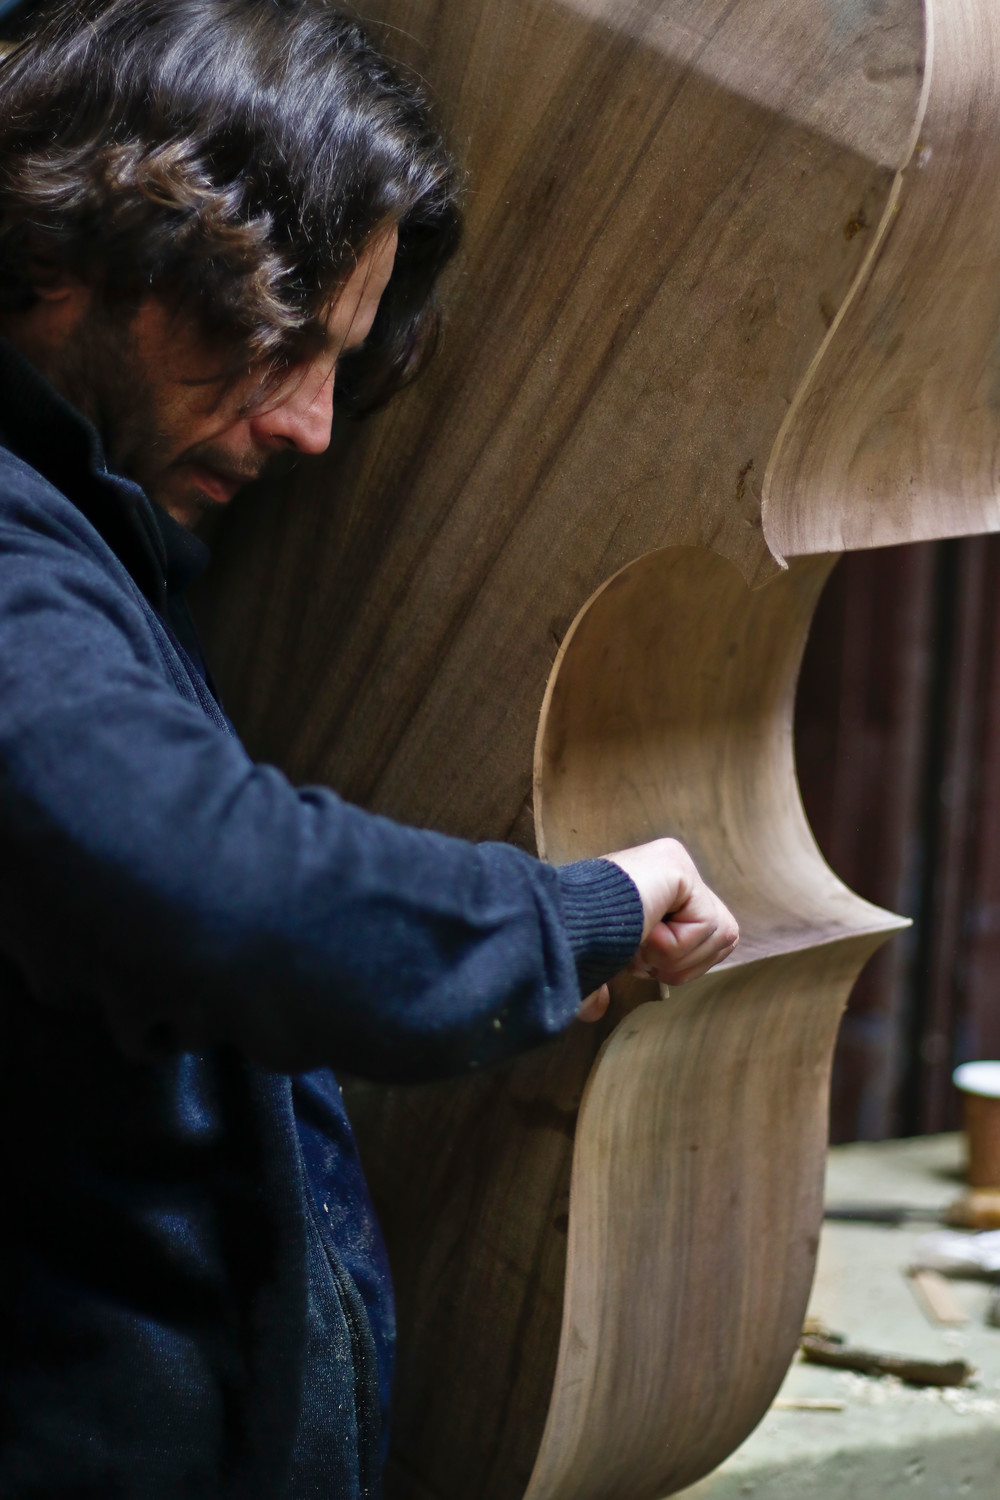 Using a chisel, Simone Diana defined the edges of a new Fendt model bass made of willow bark.